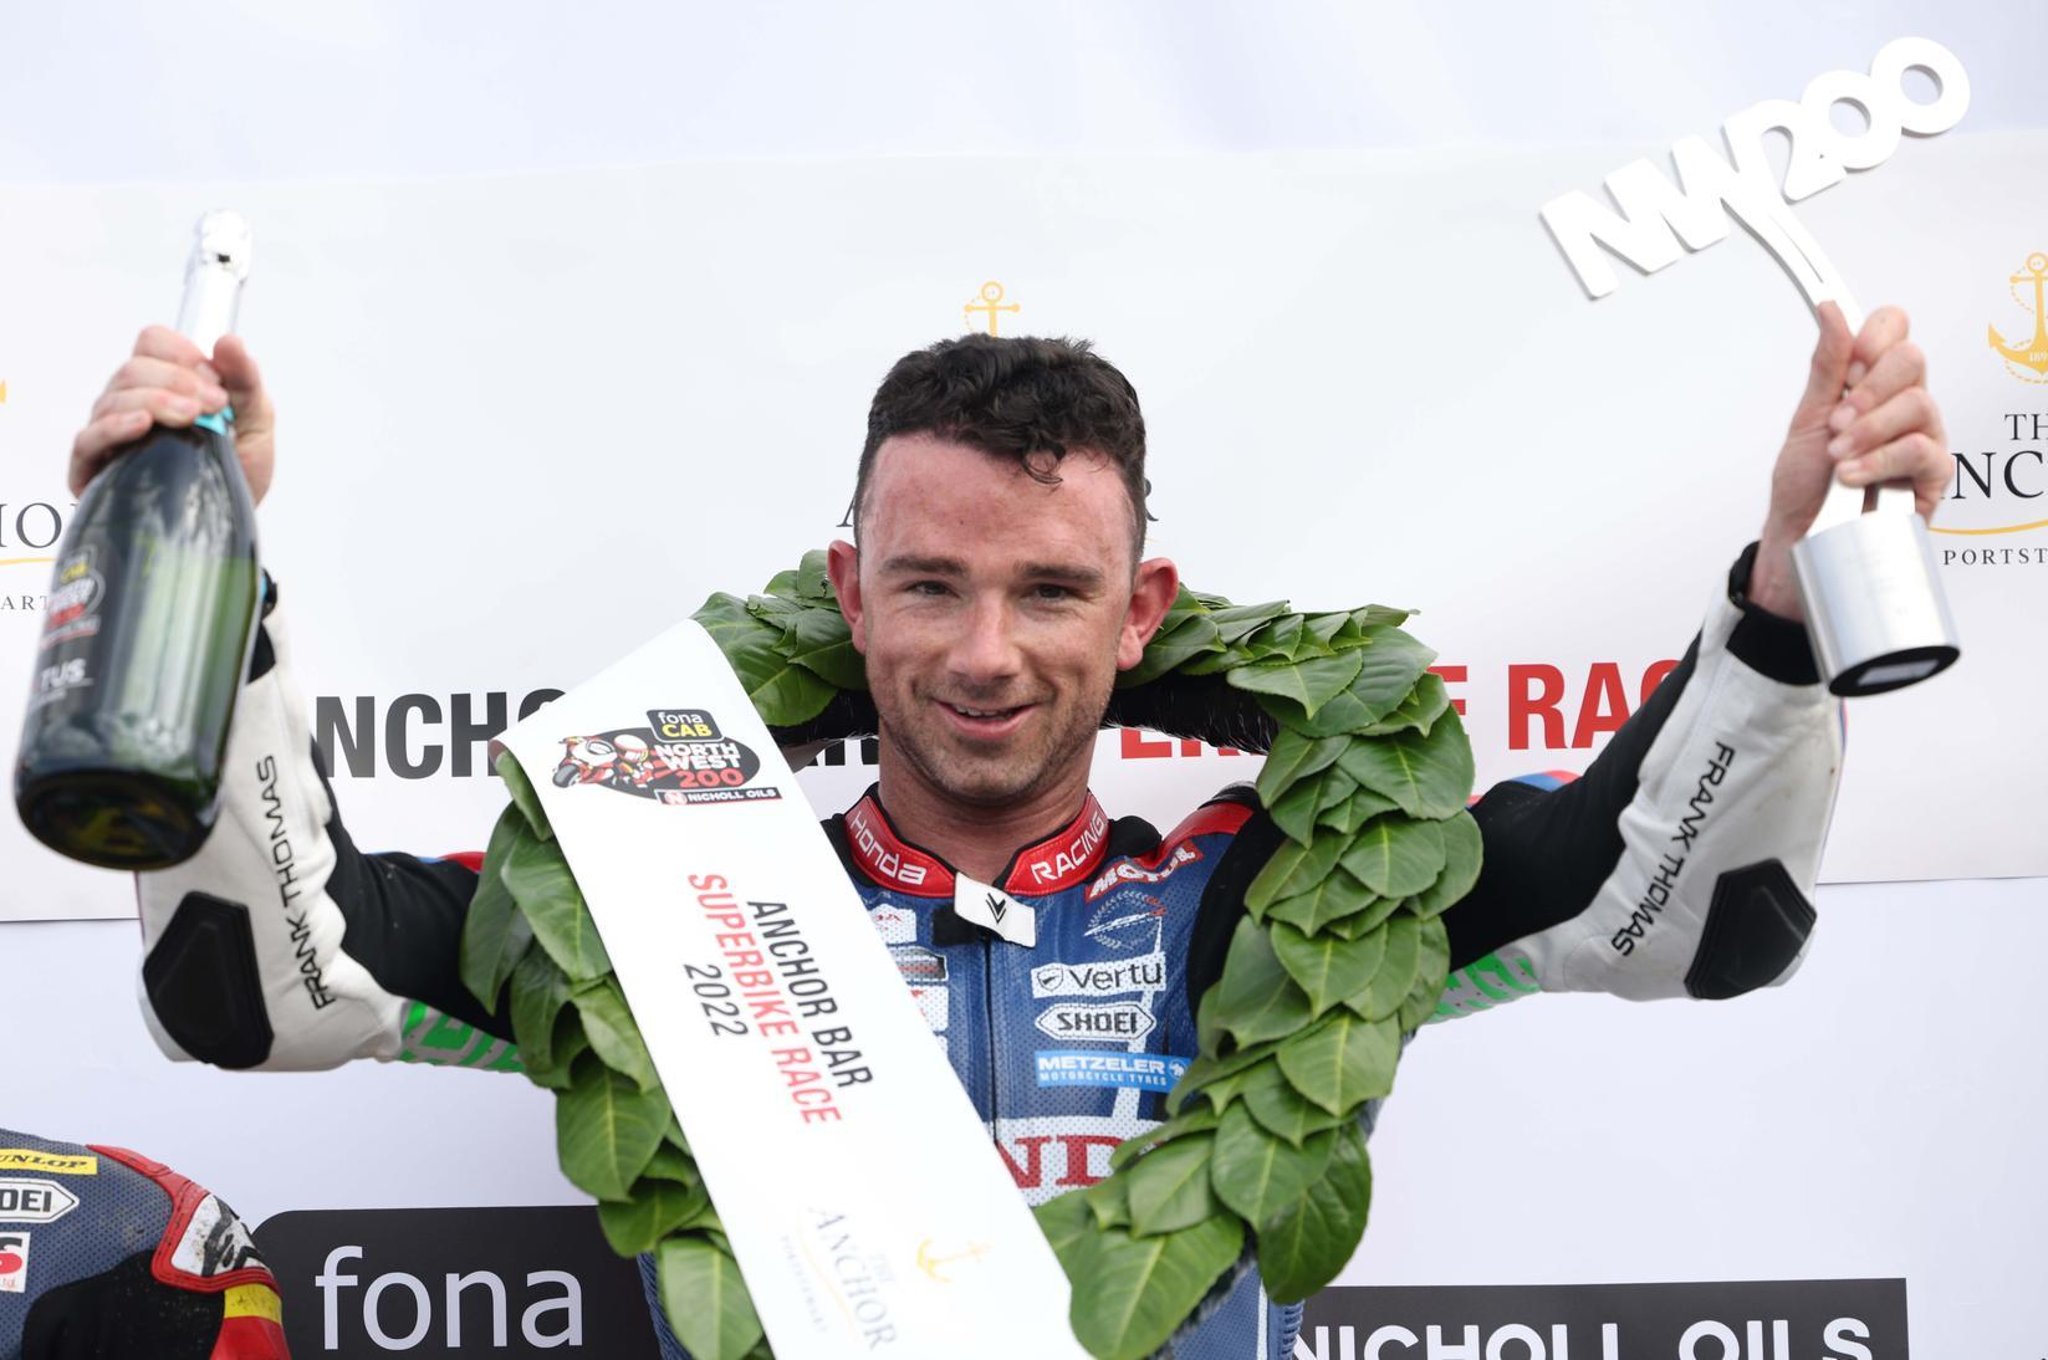 NW200: Superbike double for Honda&#8217;s Glenn Irwin in depleted headline race after Dunlop tyre concerns